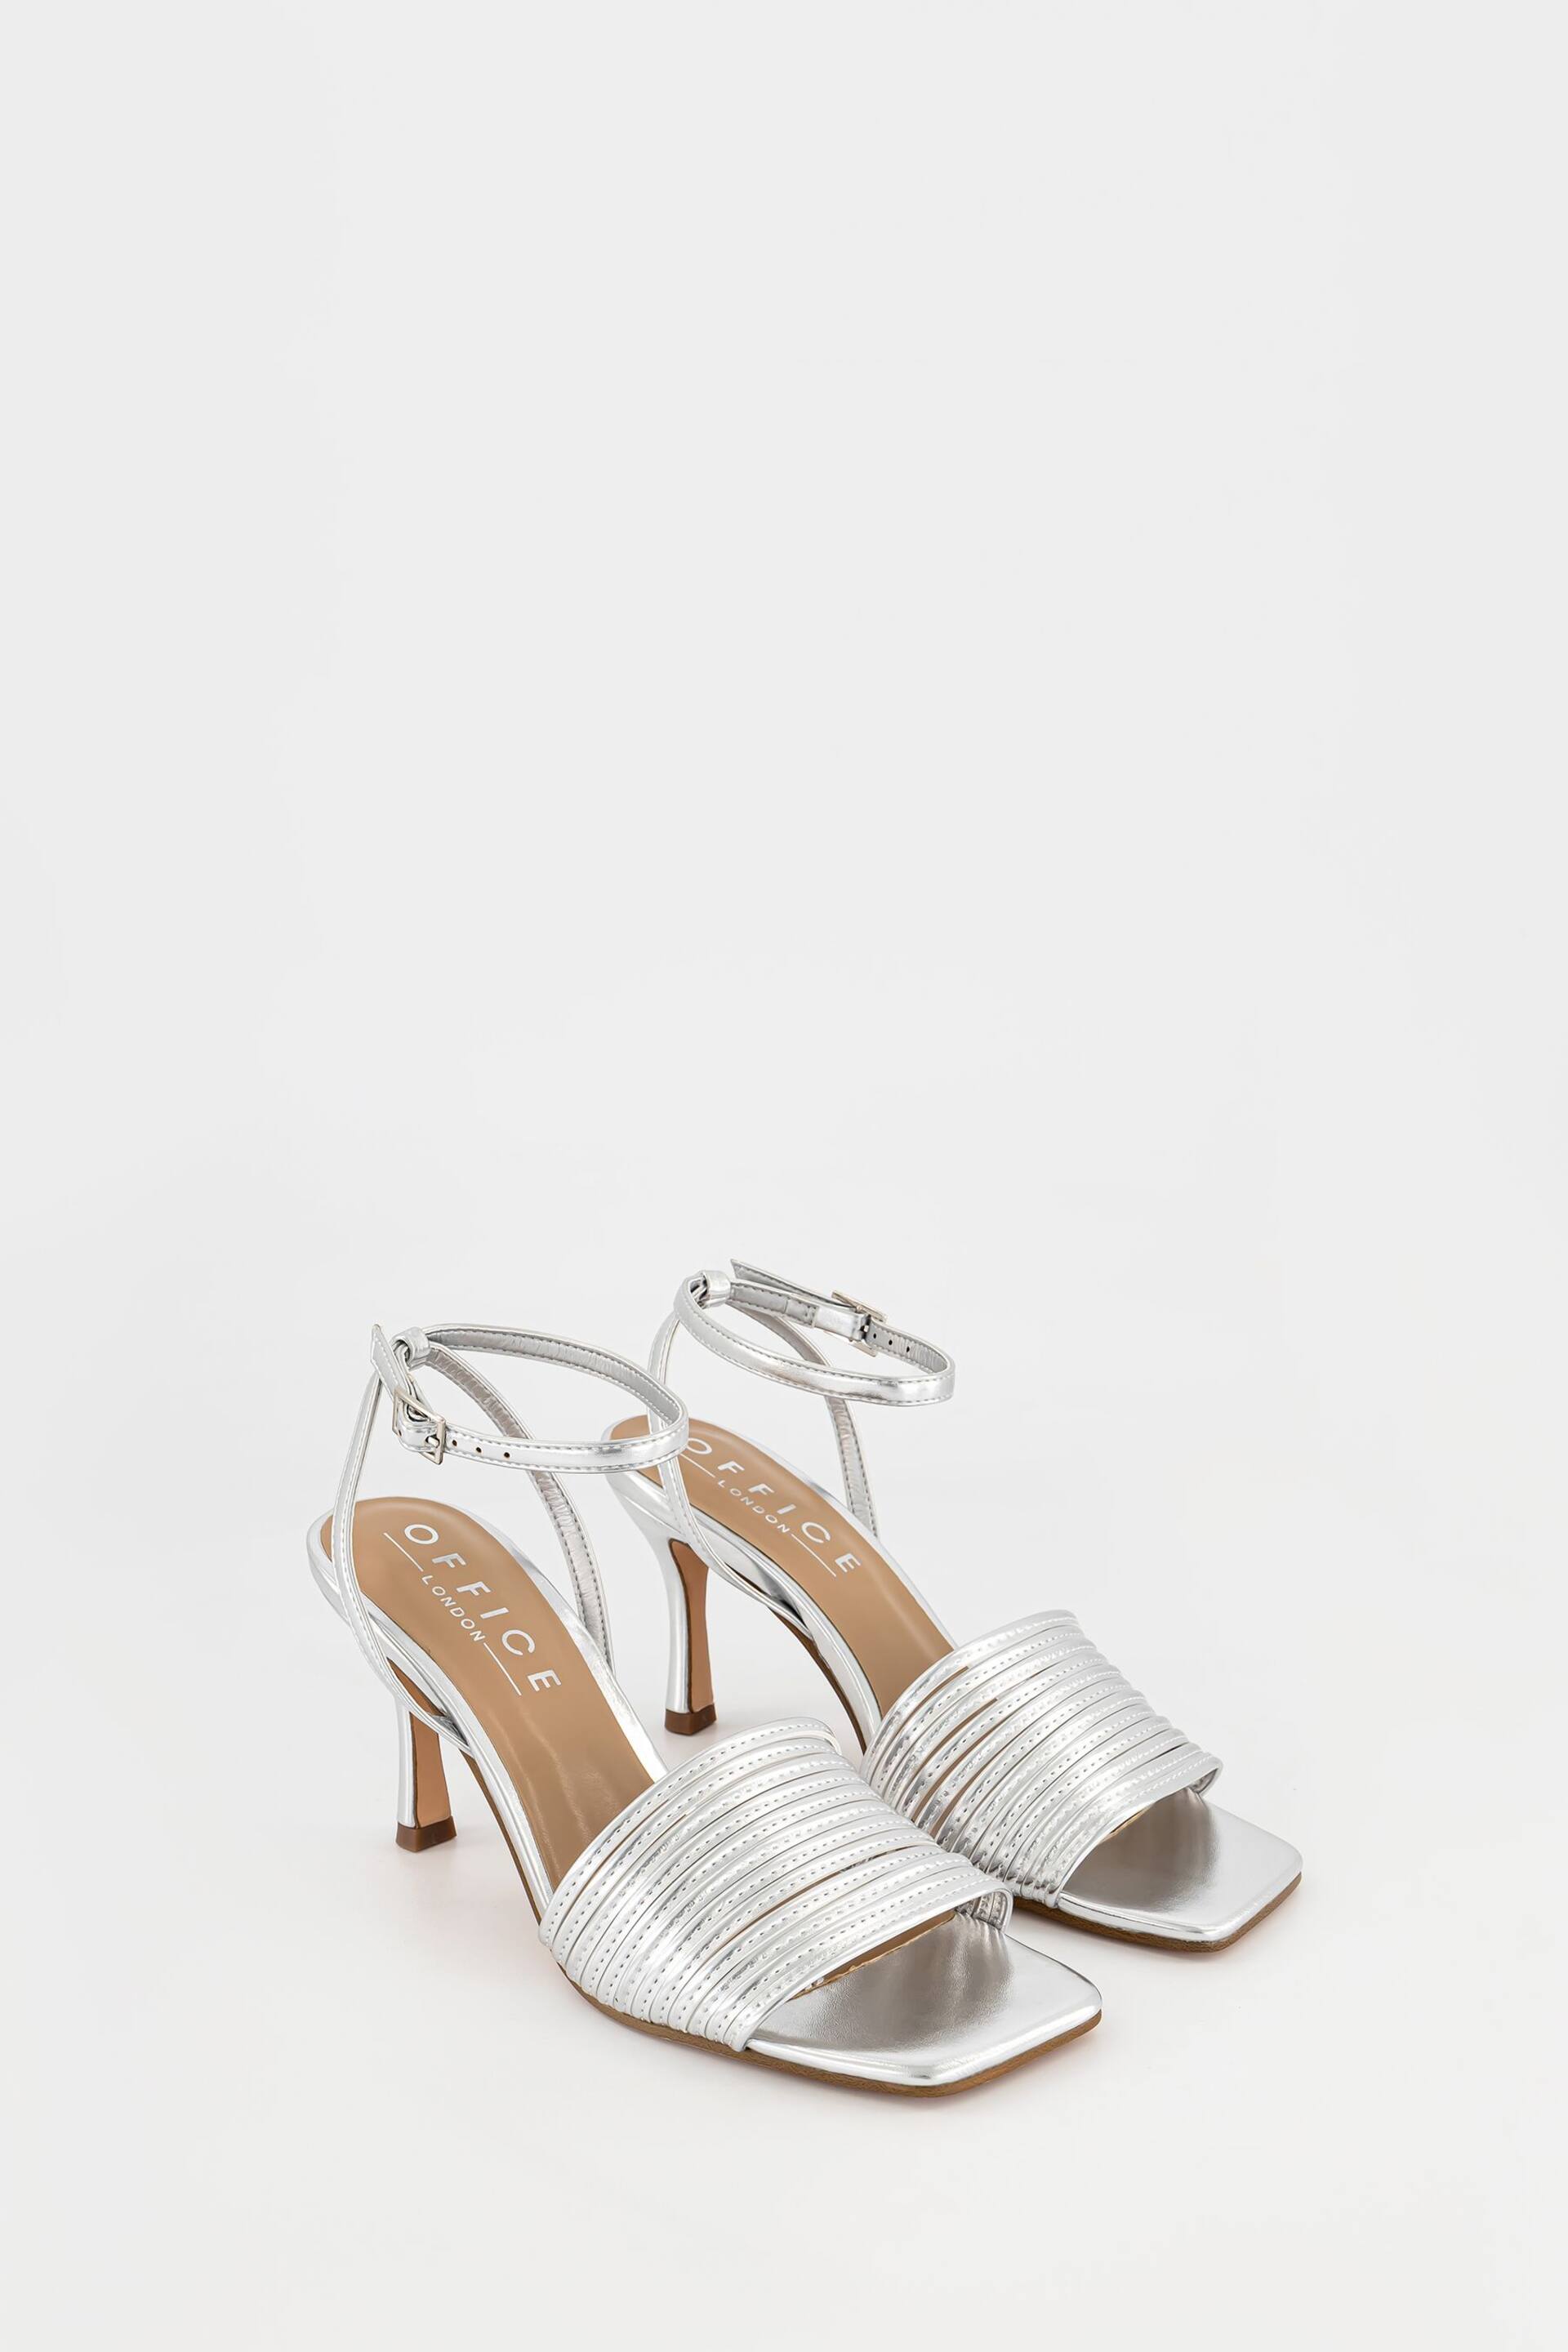 Office Silver Multi Strappy Heeled Sandals - Image 3 of 5